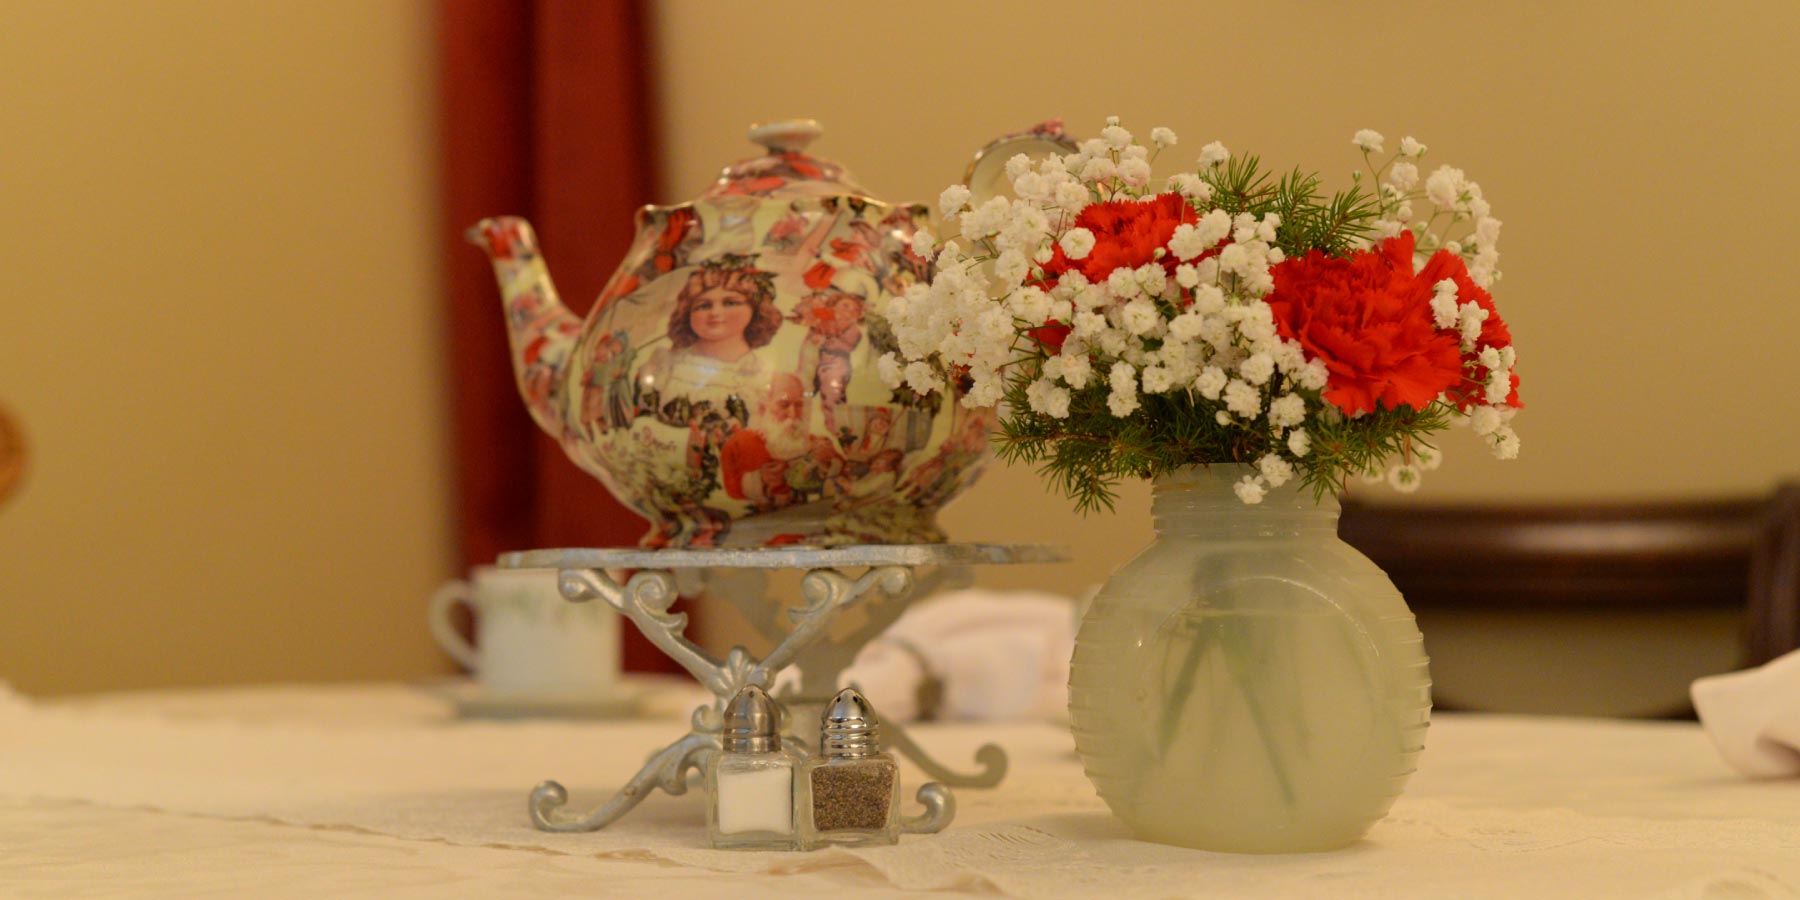 A set table including a tea pot and flowers.